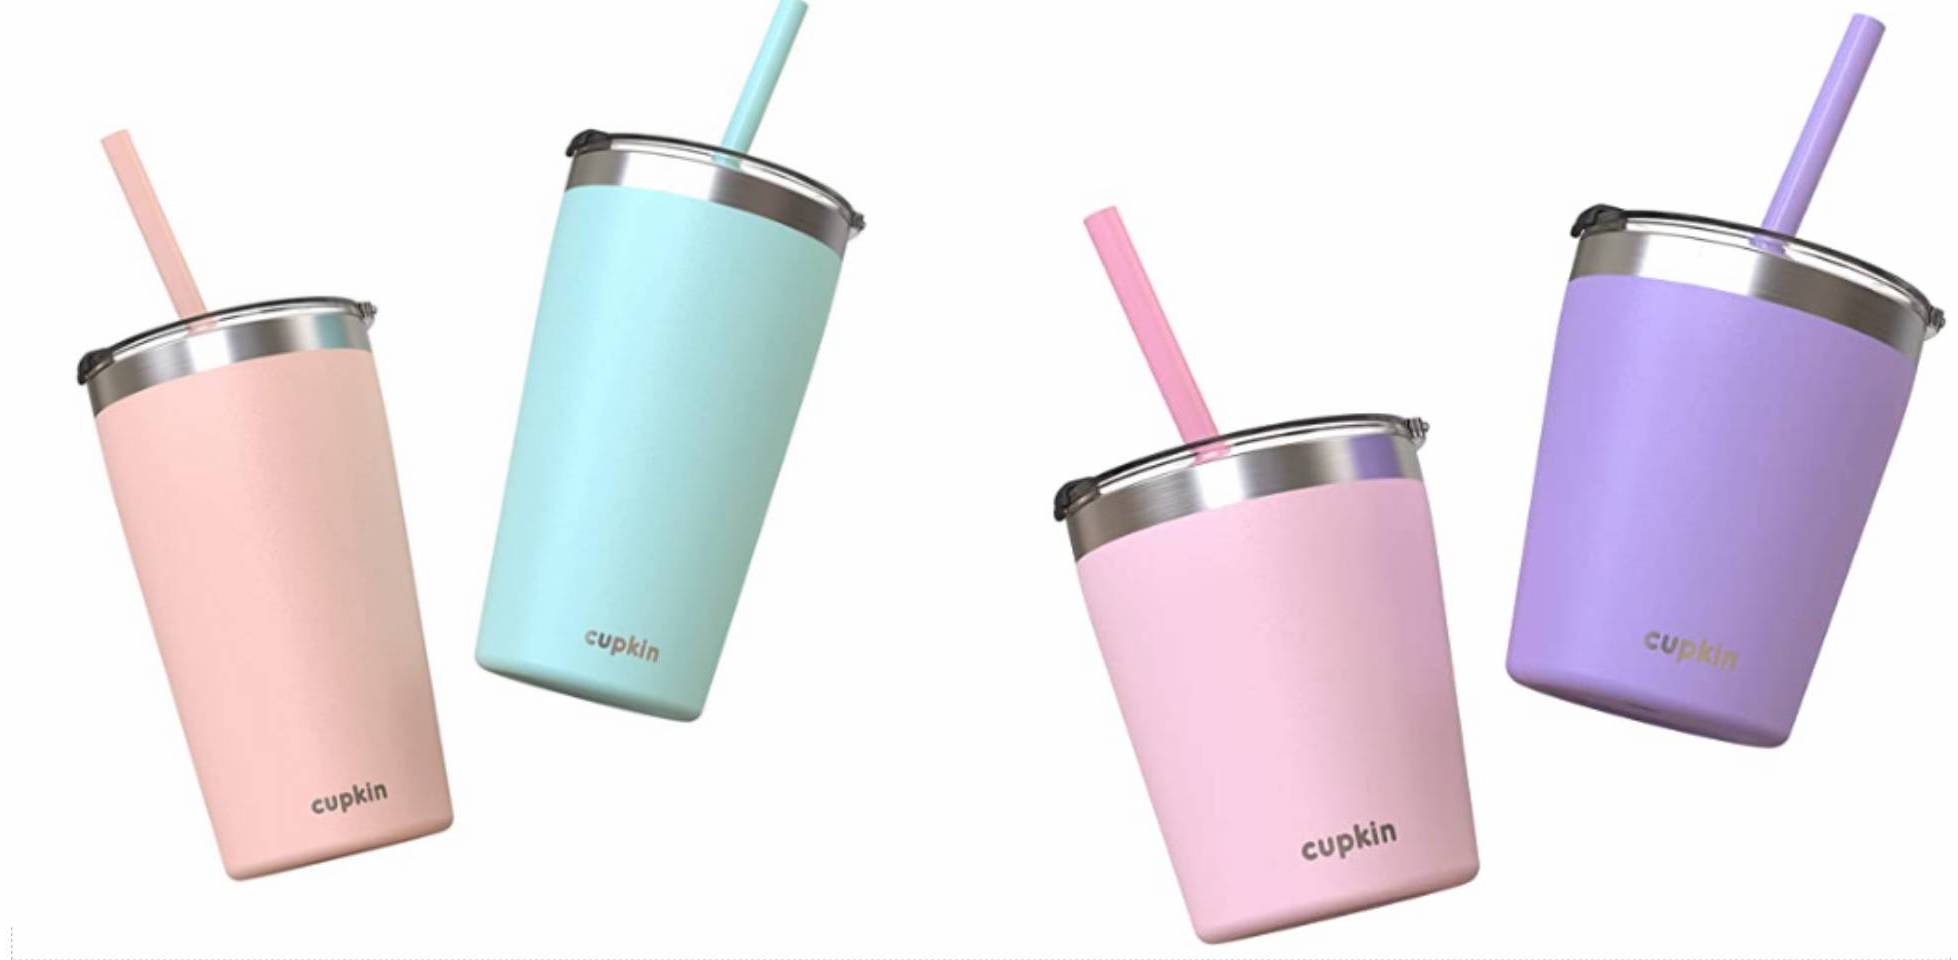 🚨RECALL ALERT!!🚨 Cupkin childrens cups with lead, Pottery Barn crib , Stainless Steel